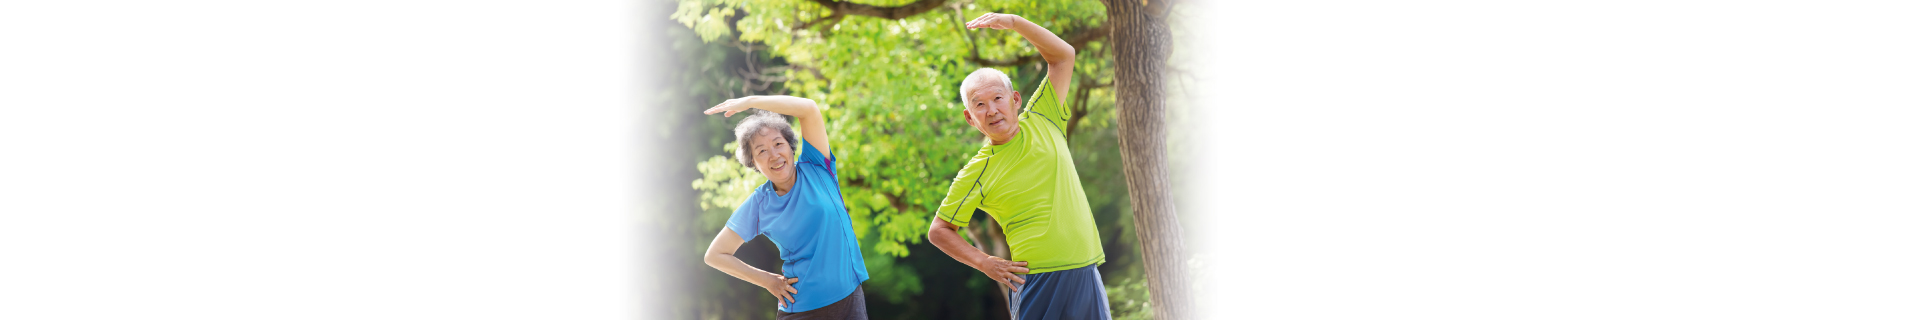 How To Stay Active With Osteoporosis